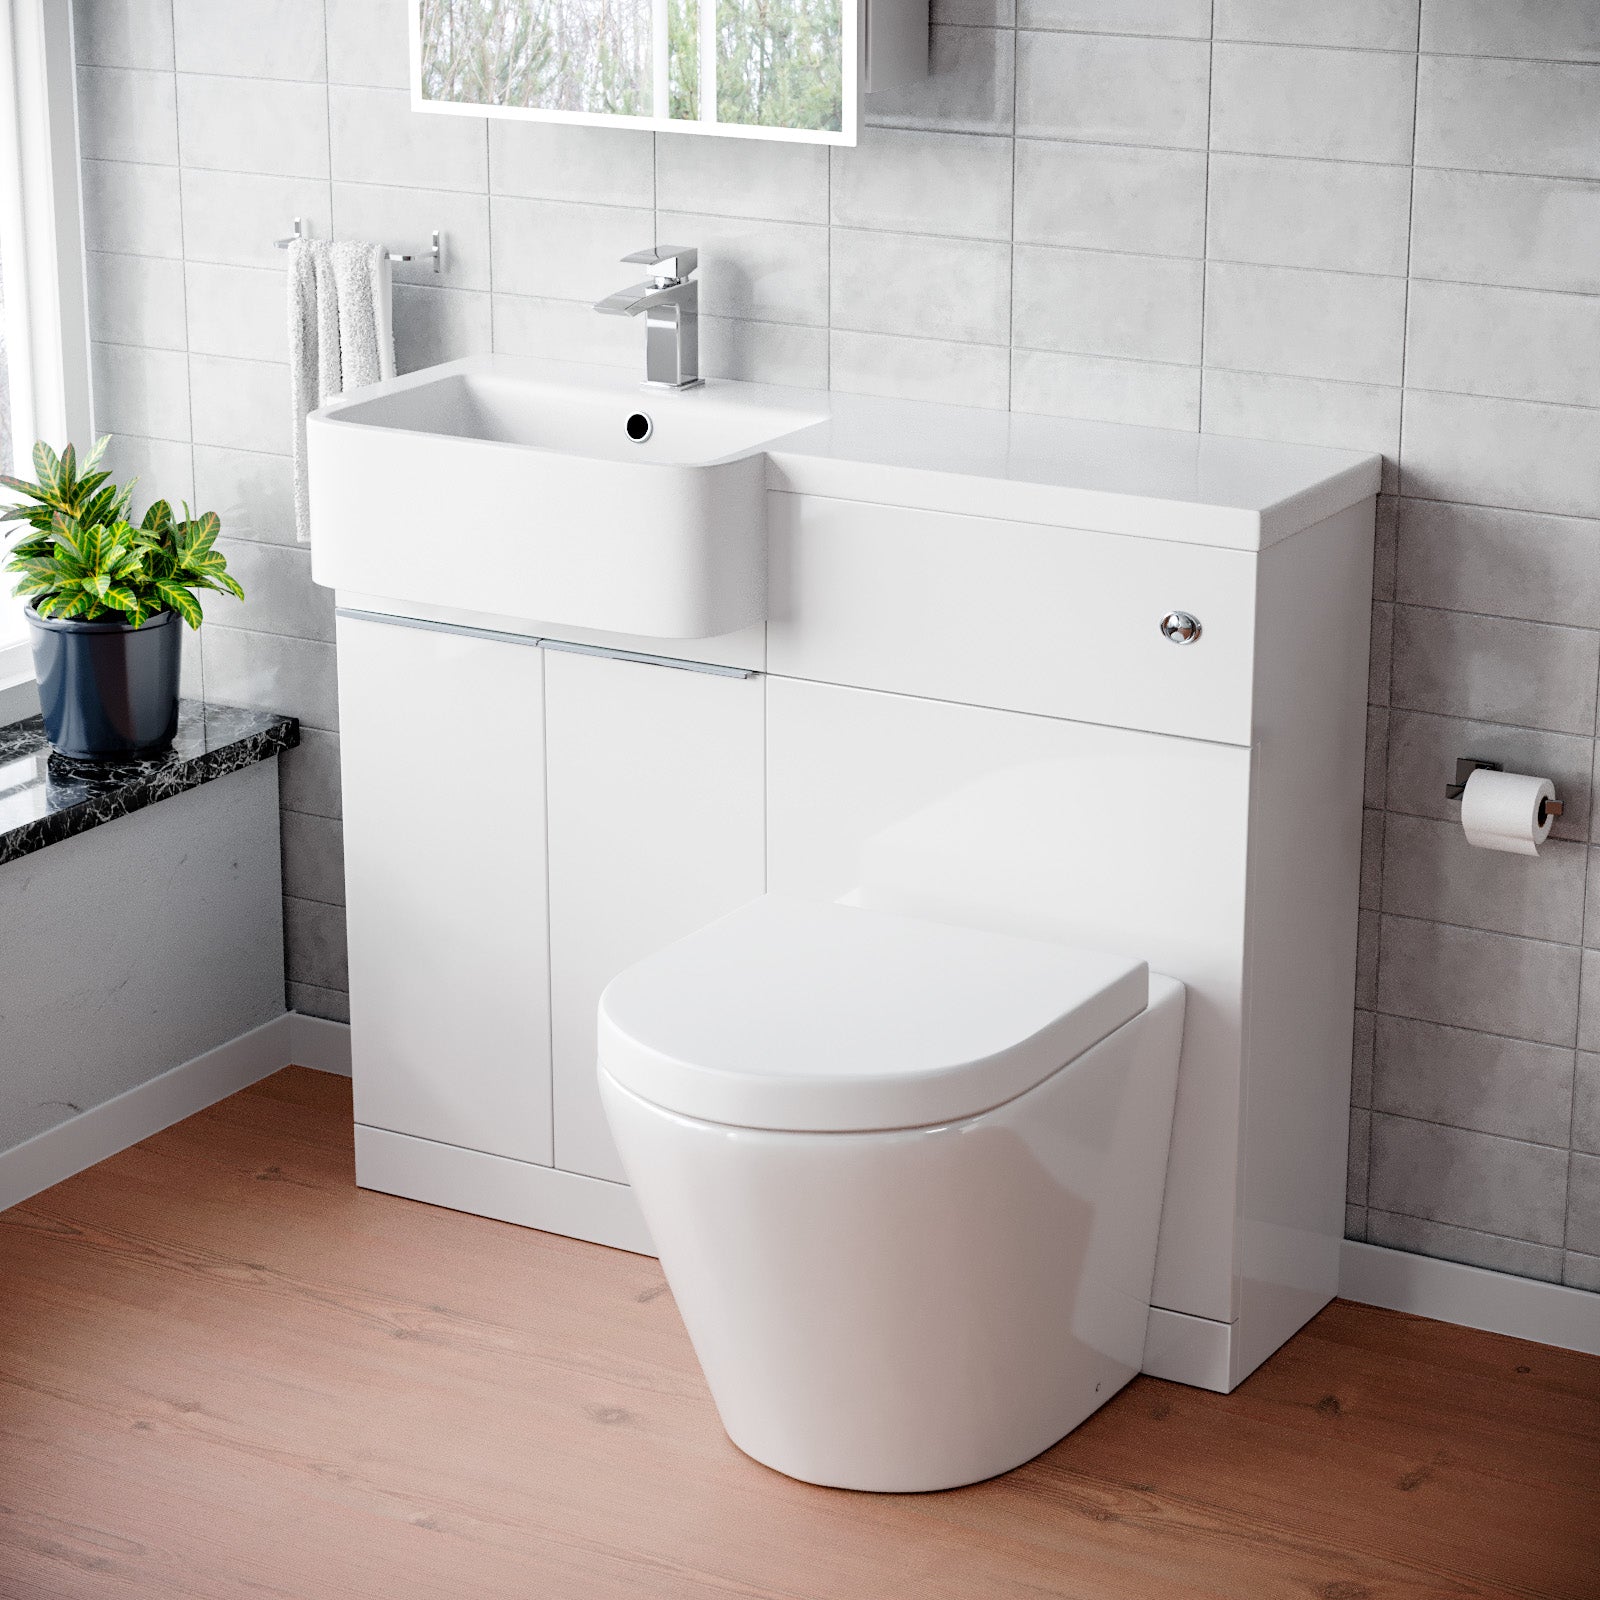 Haoran 1000mm Freestanding Cabinet White with Basin, WC Unit & Toilet